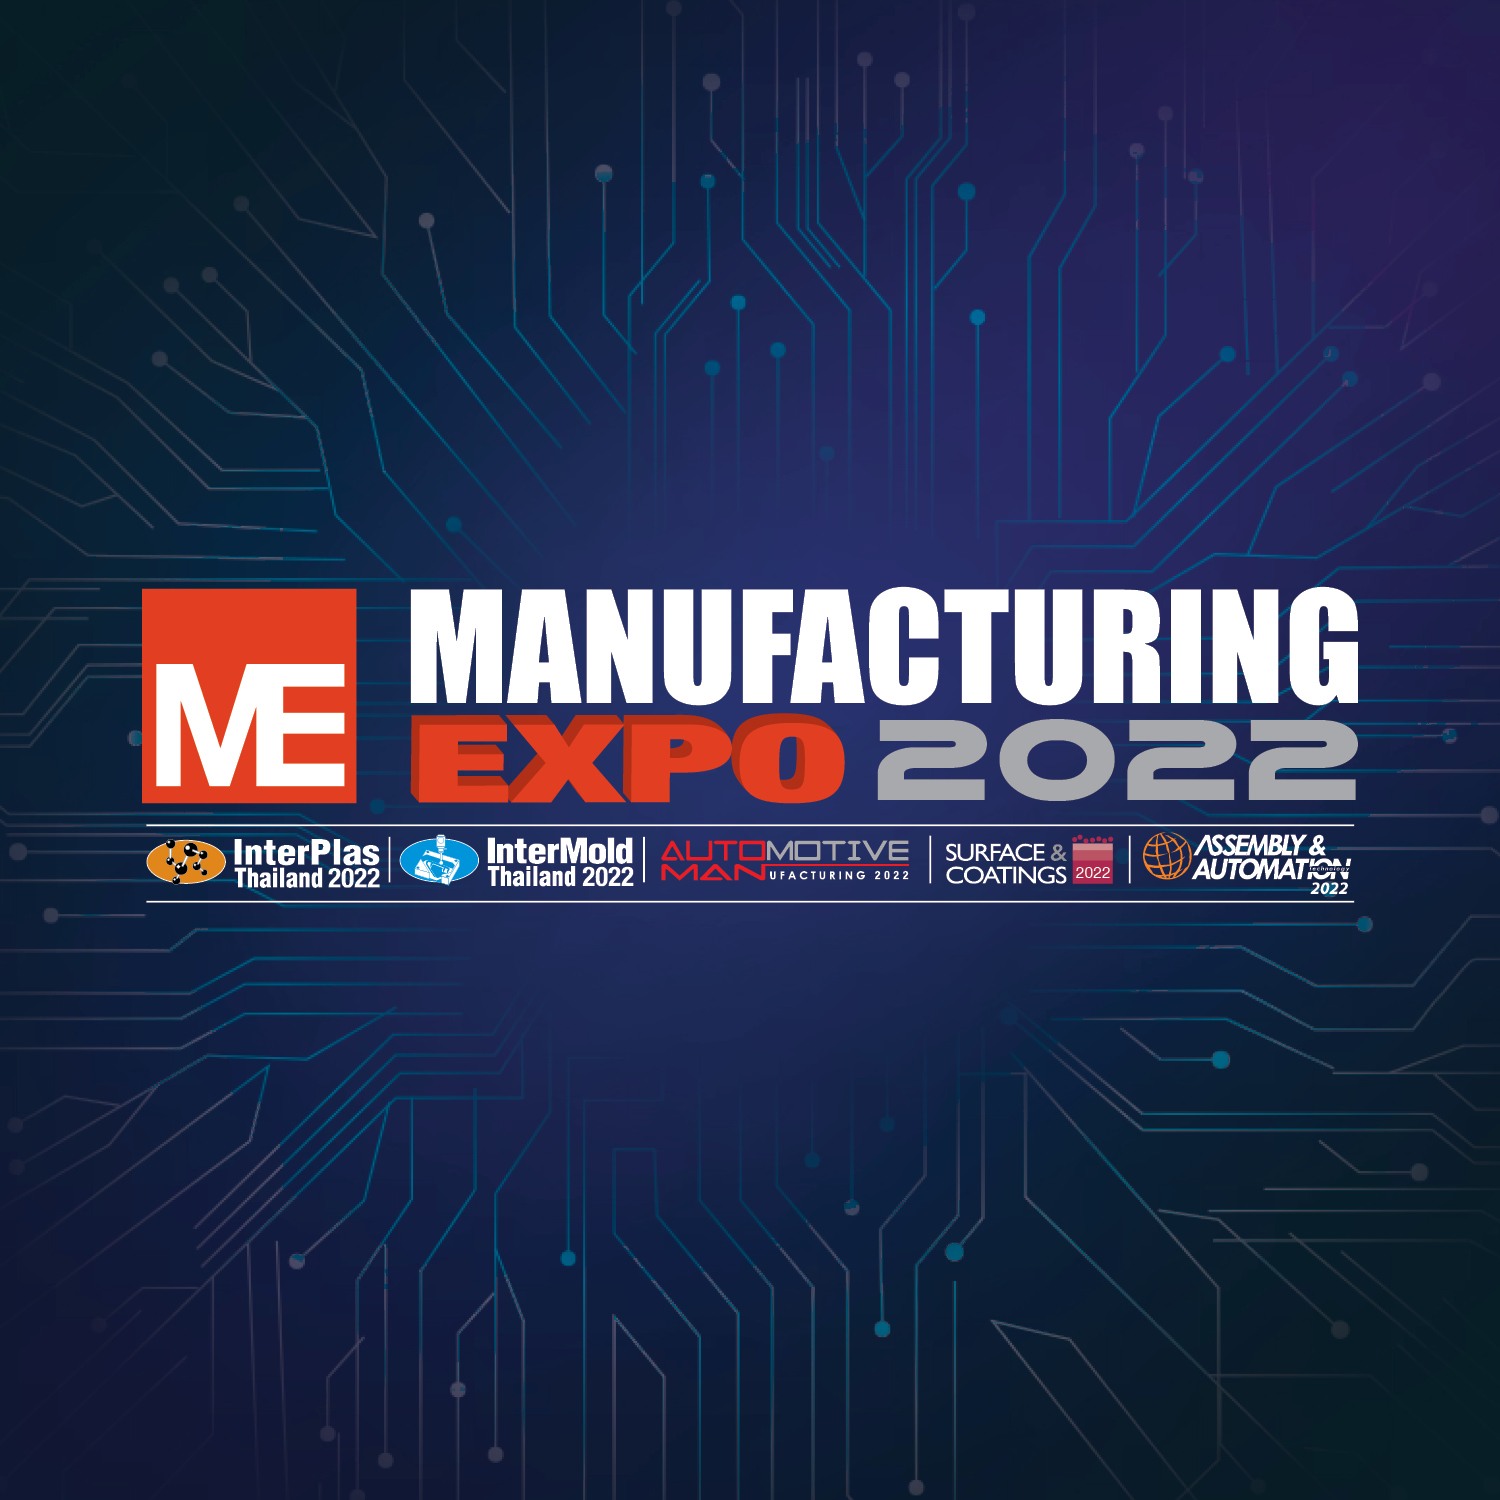 MANUFACTURING EXPO 2022 (ME 2022)